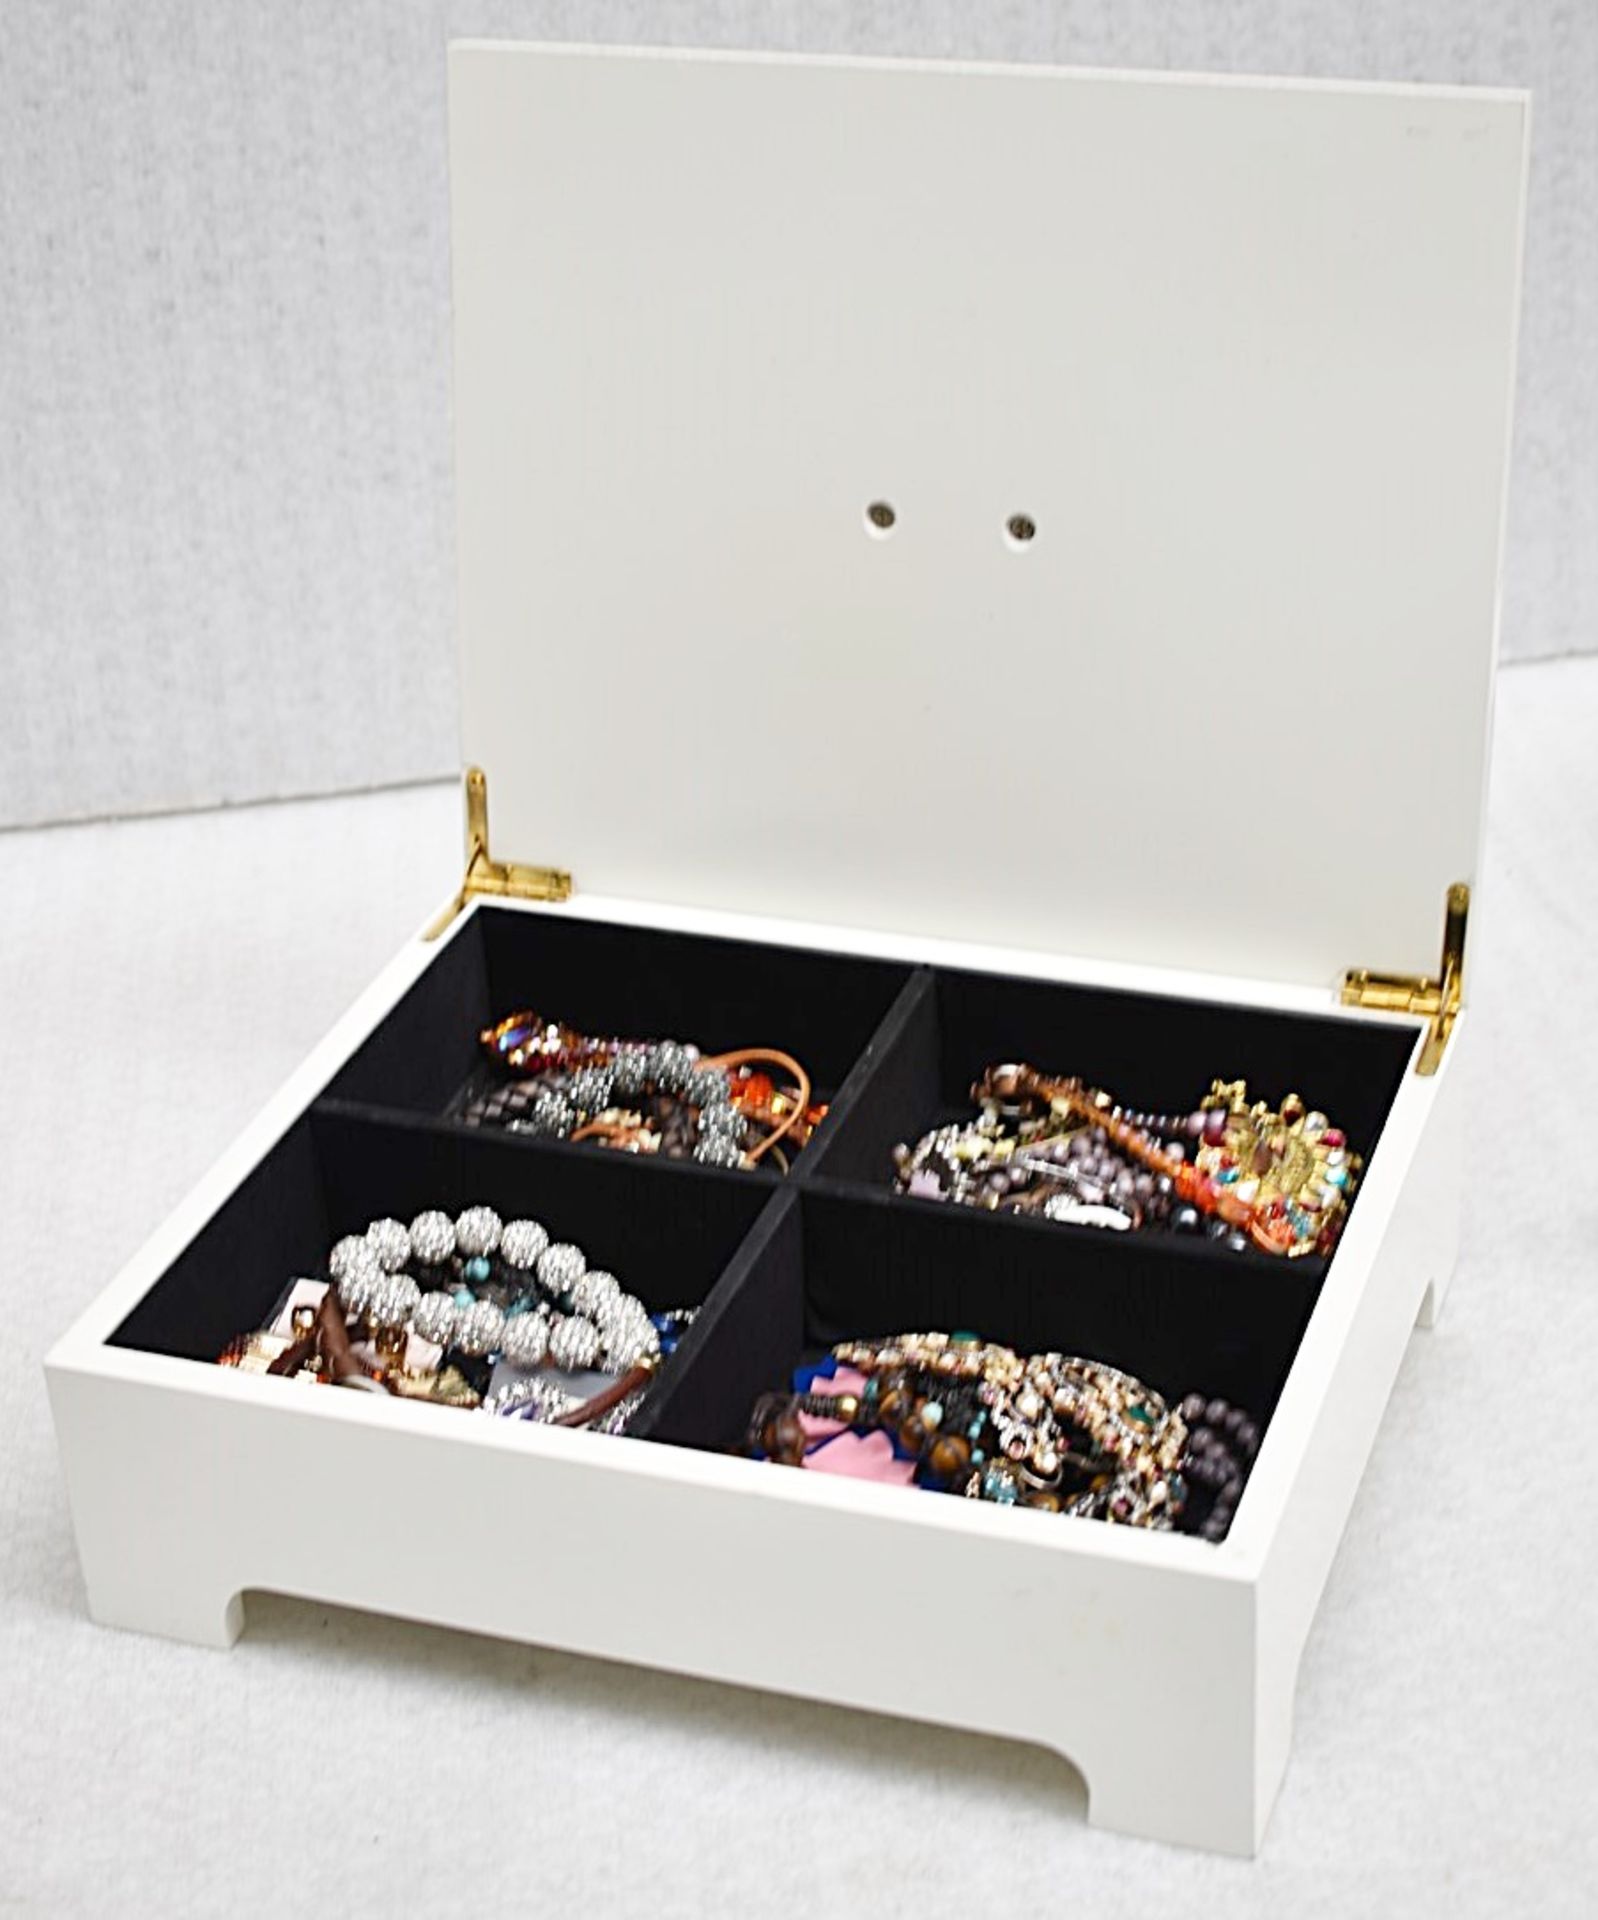 Assortment Of Costume Jewellery in a Designer-style Jewellery Box - Ref: CNT775/WH2/C24 - CL845 - NO